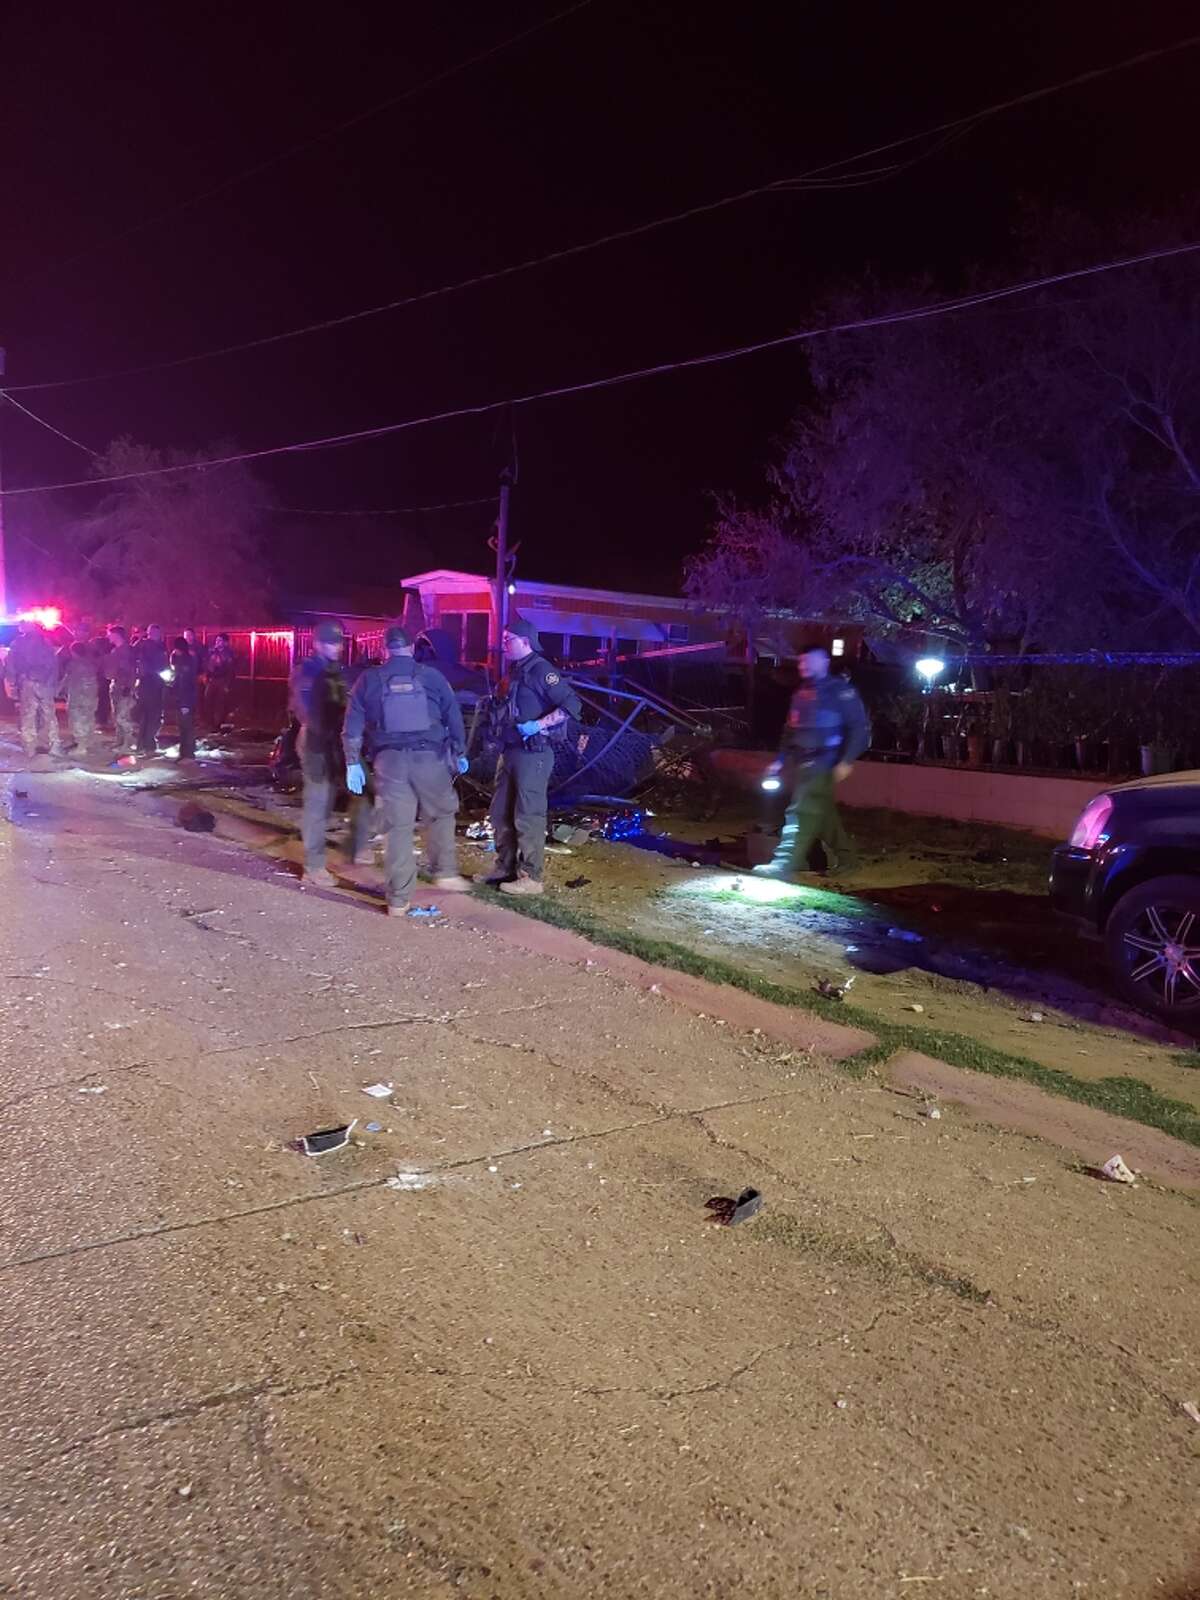 Scene from the crime scene taken around 4 a.m. after a high speed chase headed by Border Patrol led to a vehicle collision causing two casualties in Rio Bravo, Texas on Feb. 25, 2023.